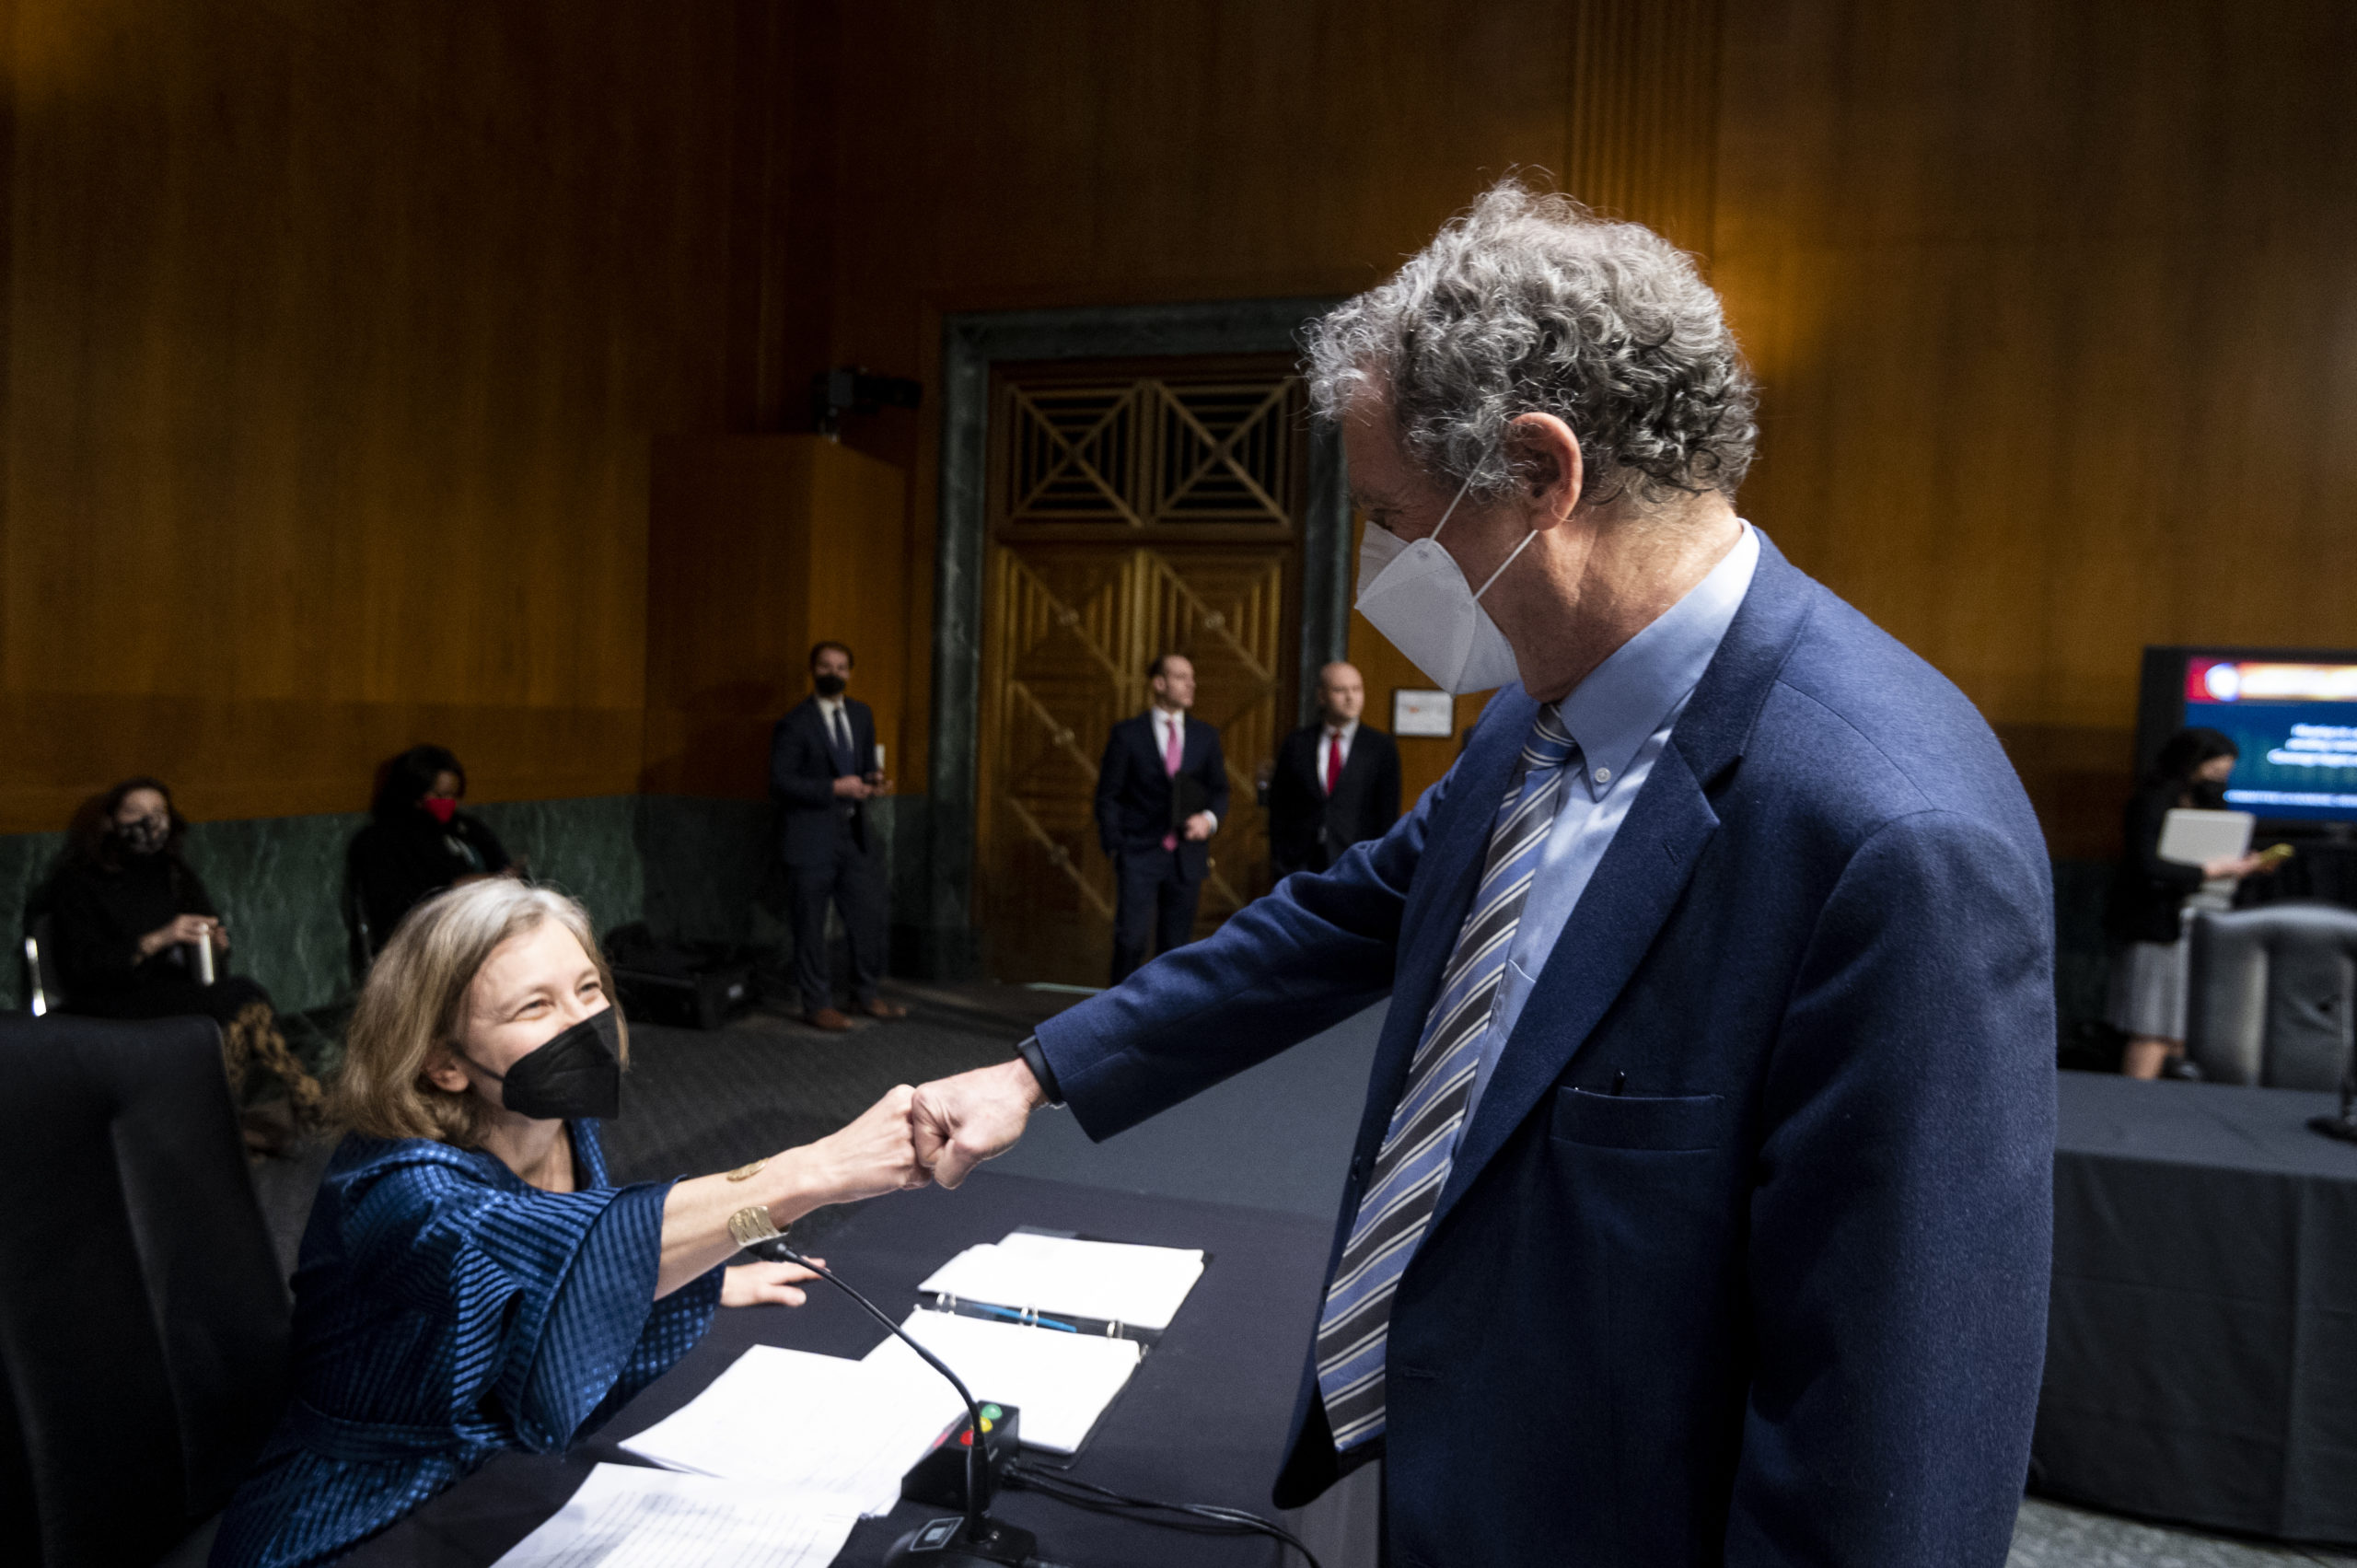 Banking Committee Chairman Sherrod Brown fist bumps Sarah Bloom Raskin before the start of her confirmation hearing on Feb. 3. (Bill Clark/Pool/Getty Images)